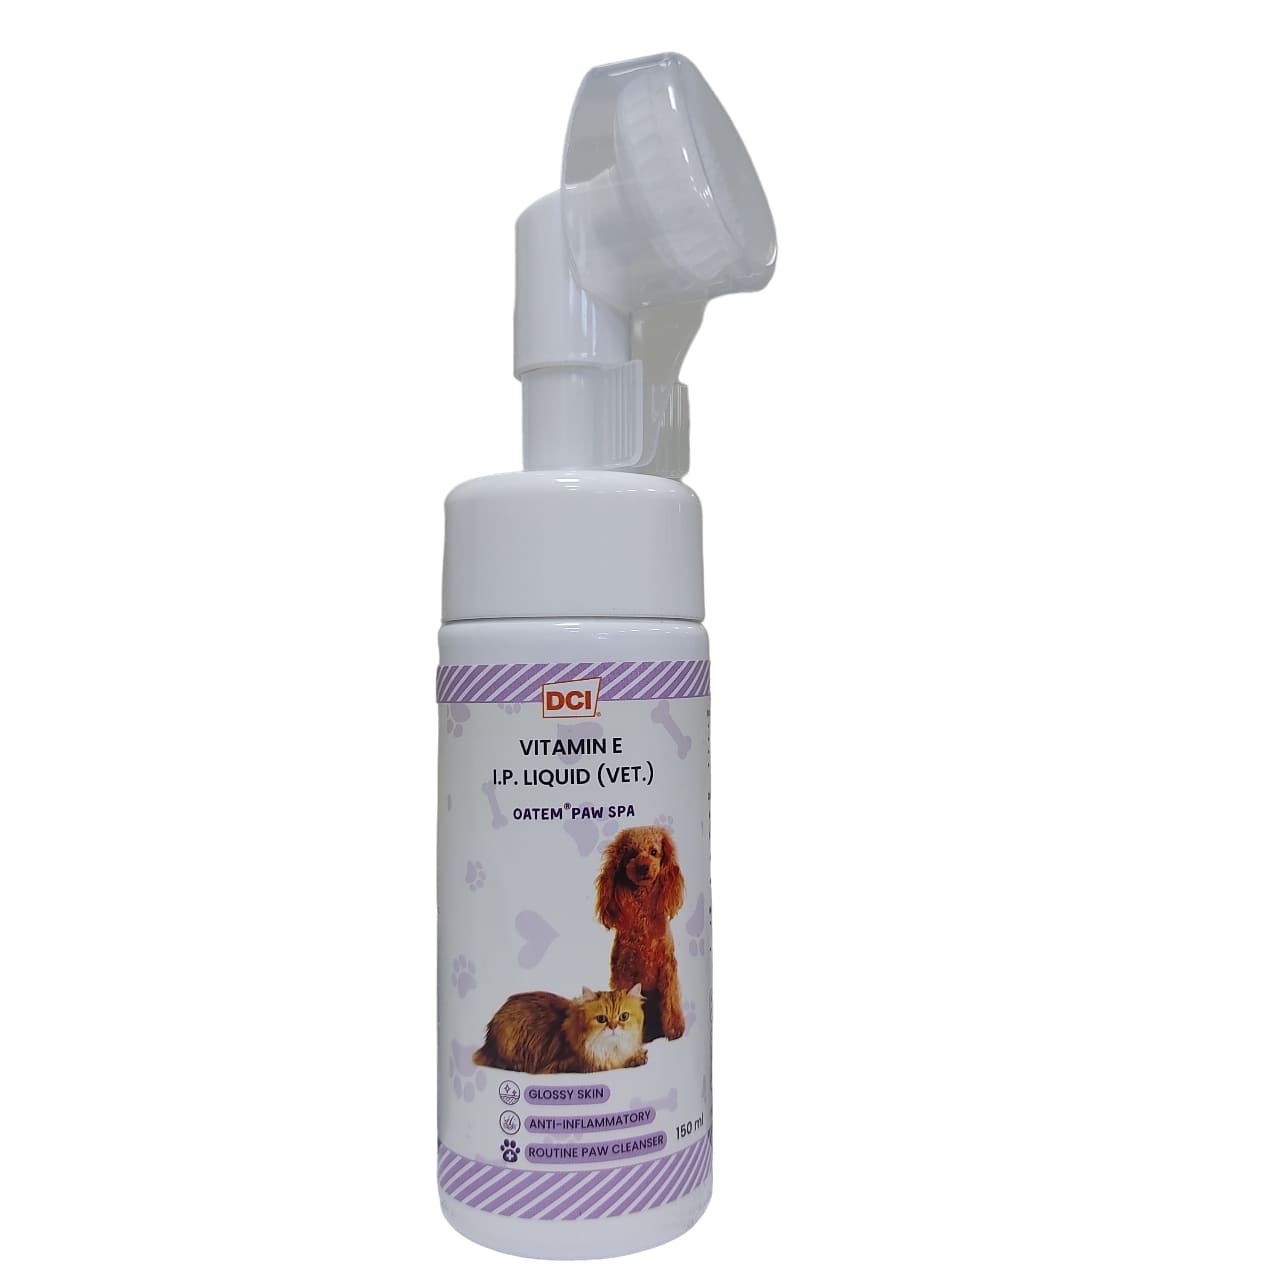 https://disinfecto.com/wp-content/uploads/2023/07/Oatem-Paw-SPA-Viatmin-E-Paw-Cleaner-for-Dogs-and-Cats.jpg